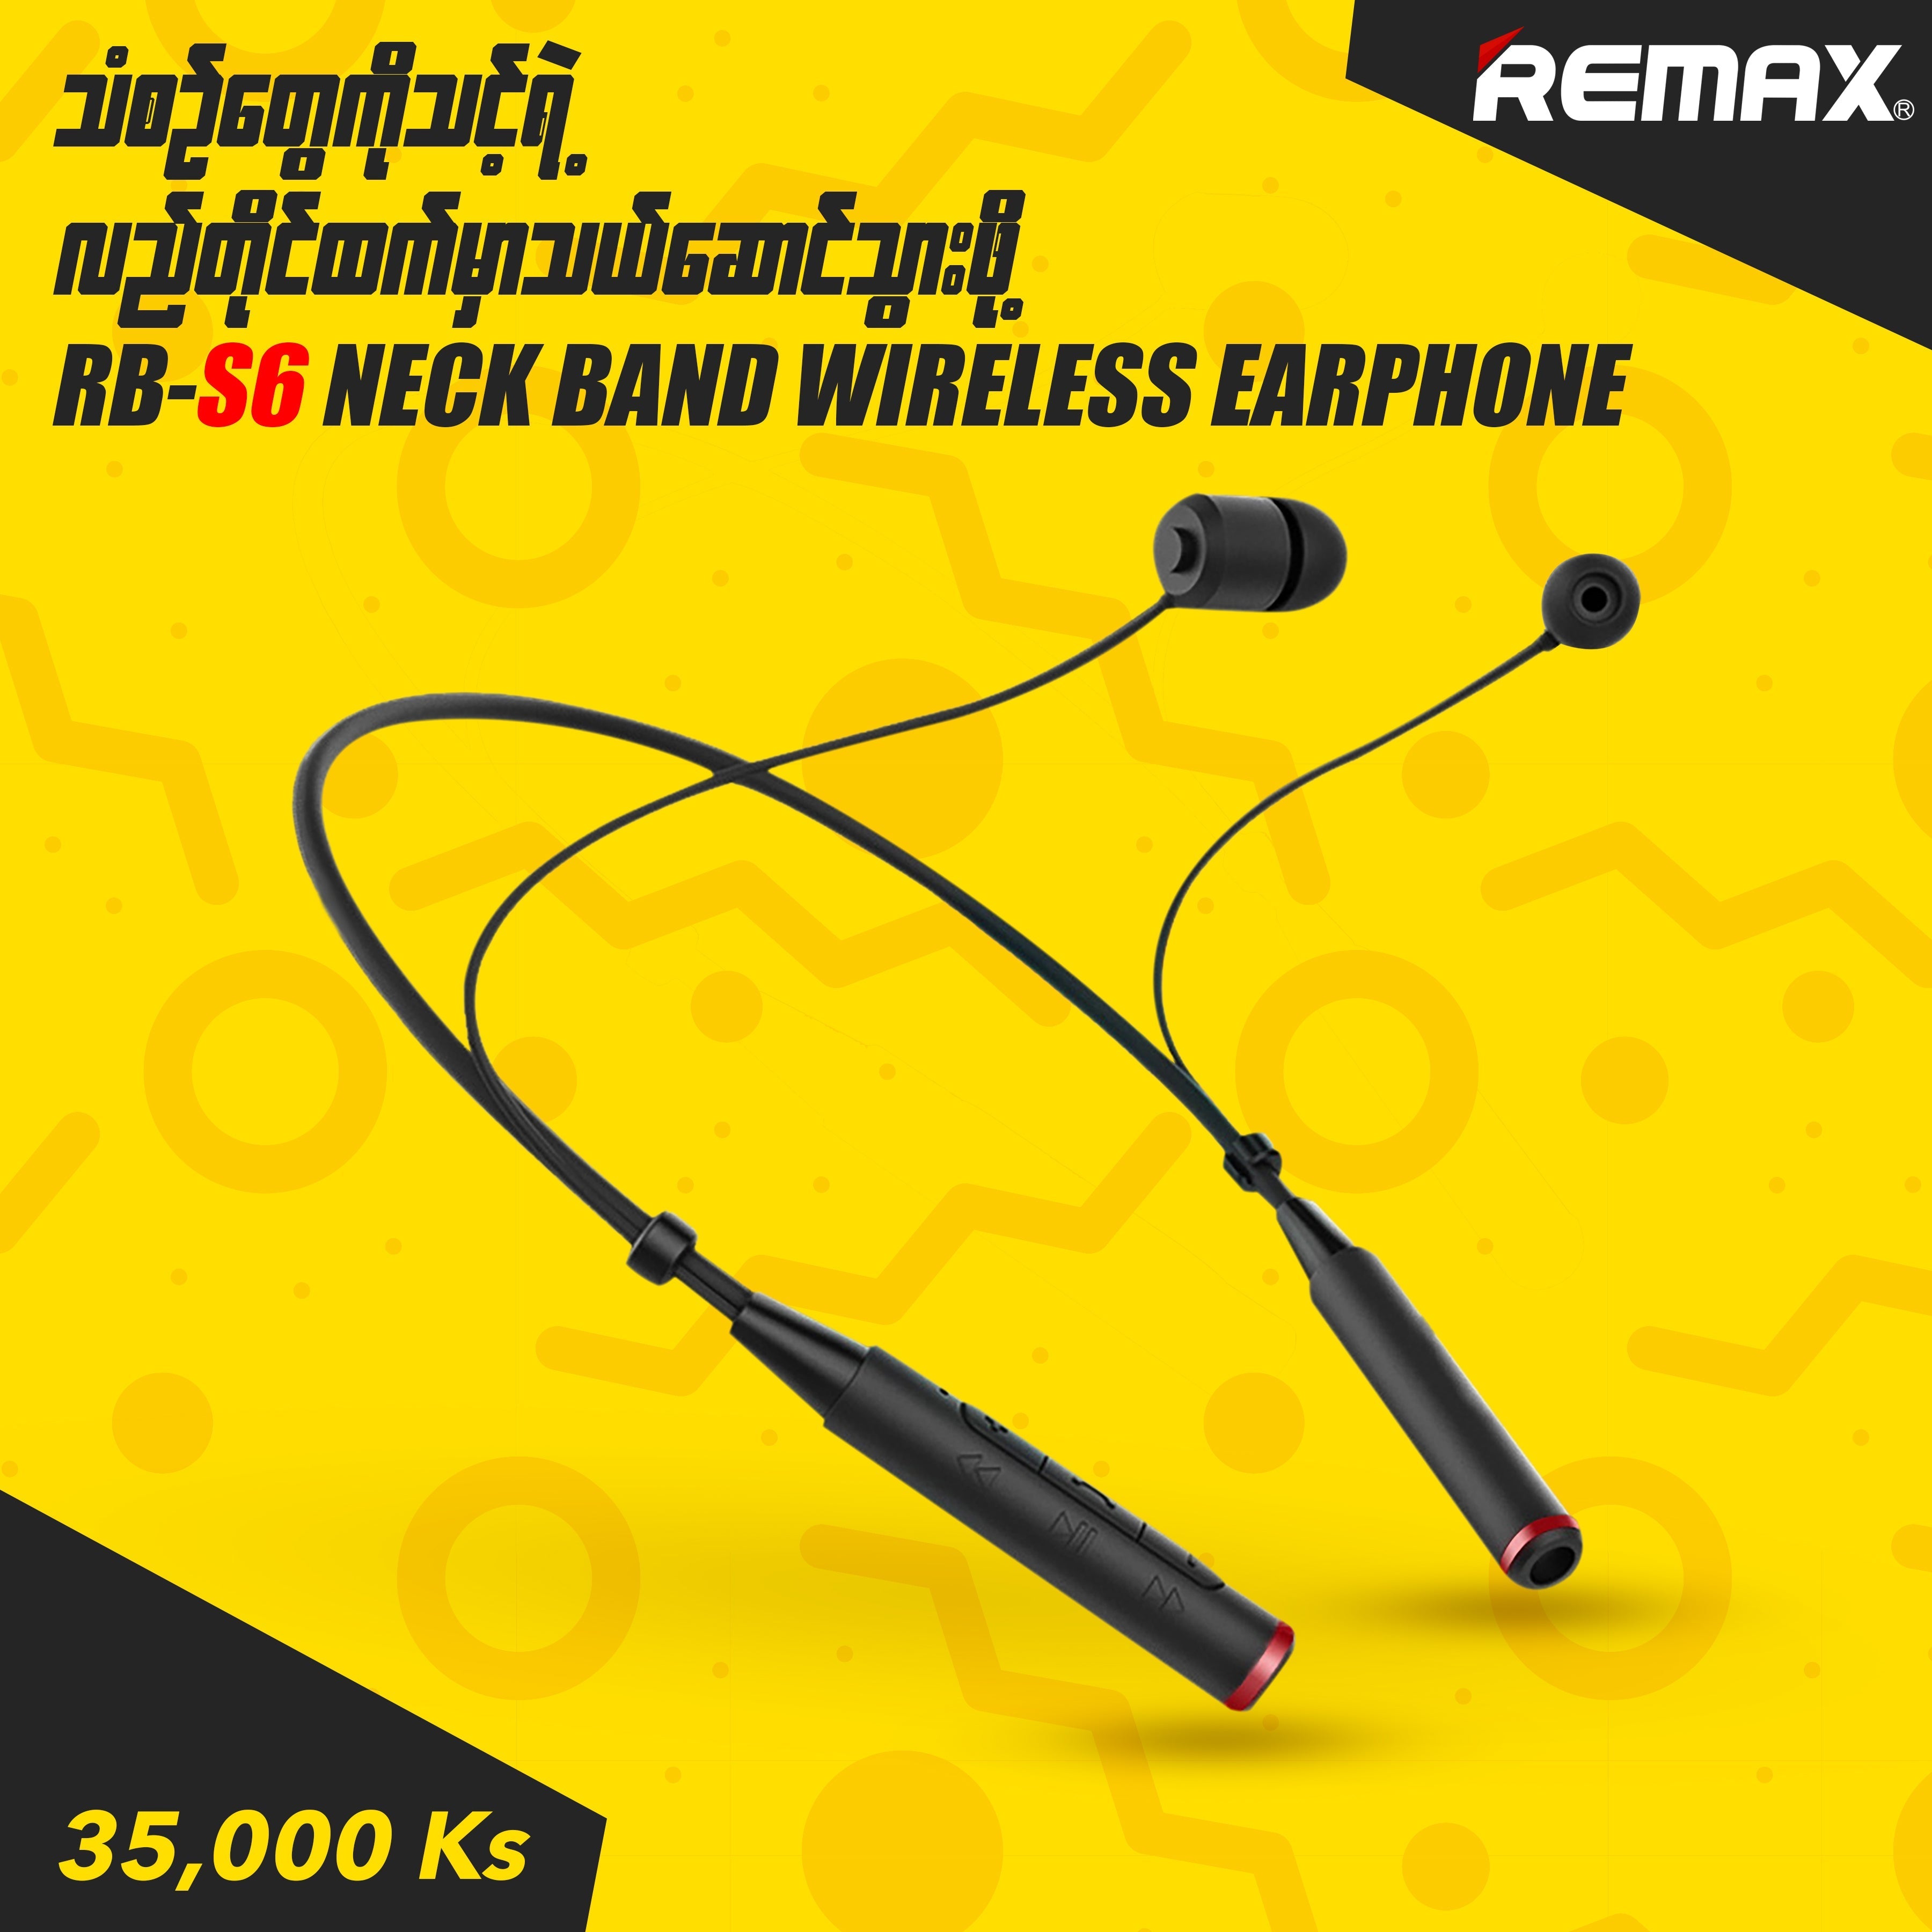 REMAX Neckband Bluetooth Earphone (RB-S6),Neckband,Neckband Wireless Headset,Bluetooth Neckband Headphone,Best Neckband Headphone for running,Sport Bluetooth Headset for Apple, Android, wireless stereo headset,Neckband with noise canceling